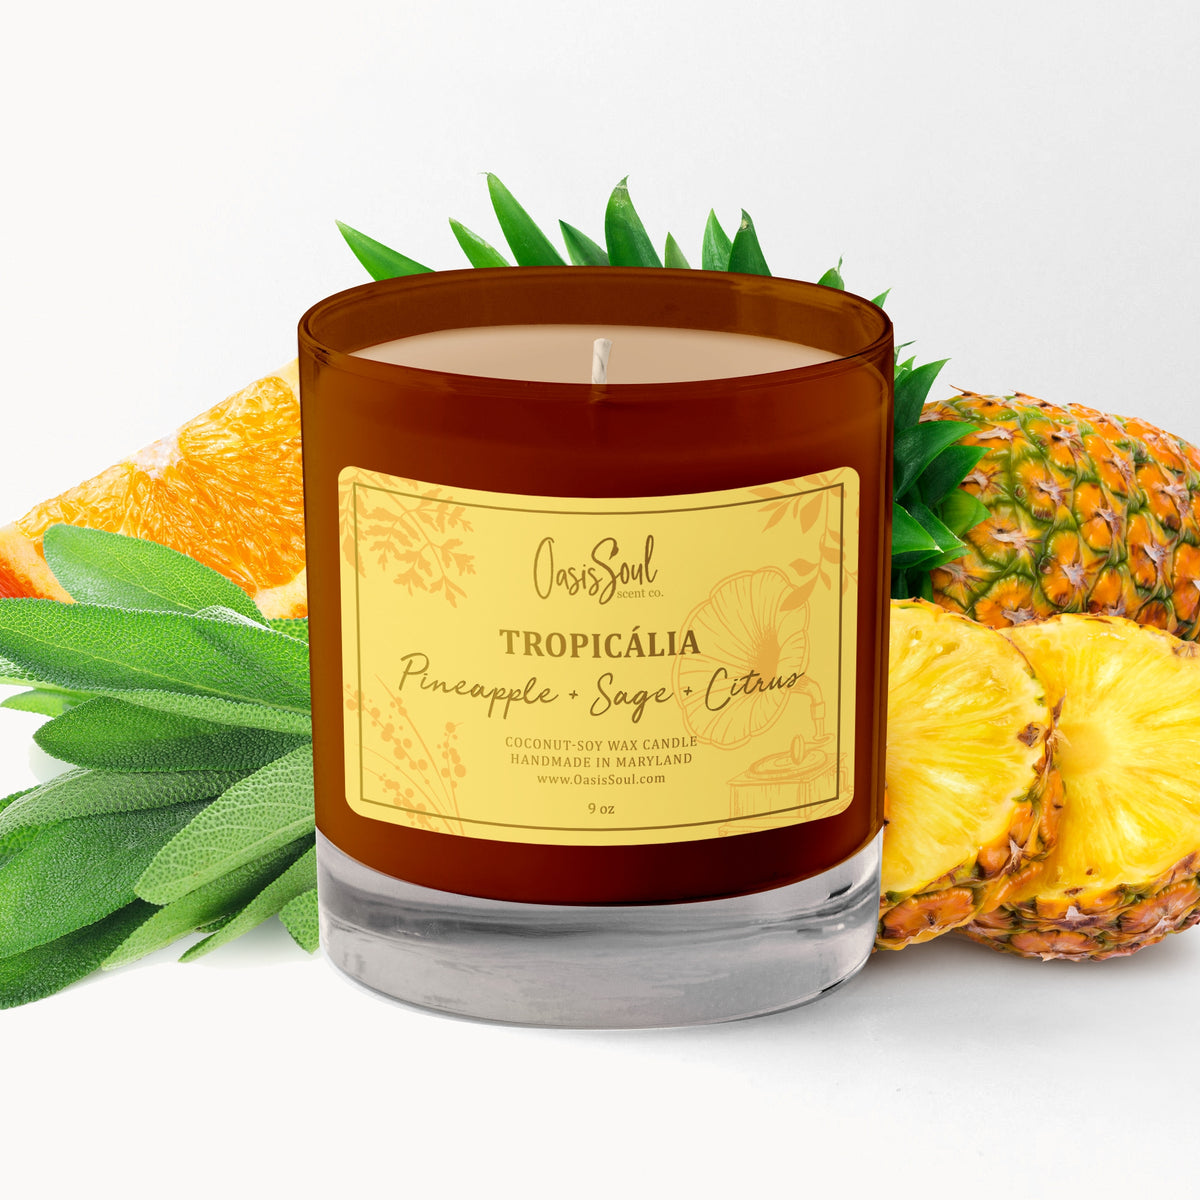 Iced Pineapple Fragrance Oil - Nature's Garden Candles